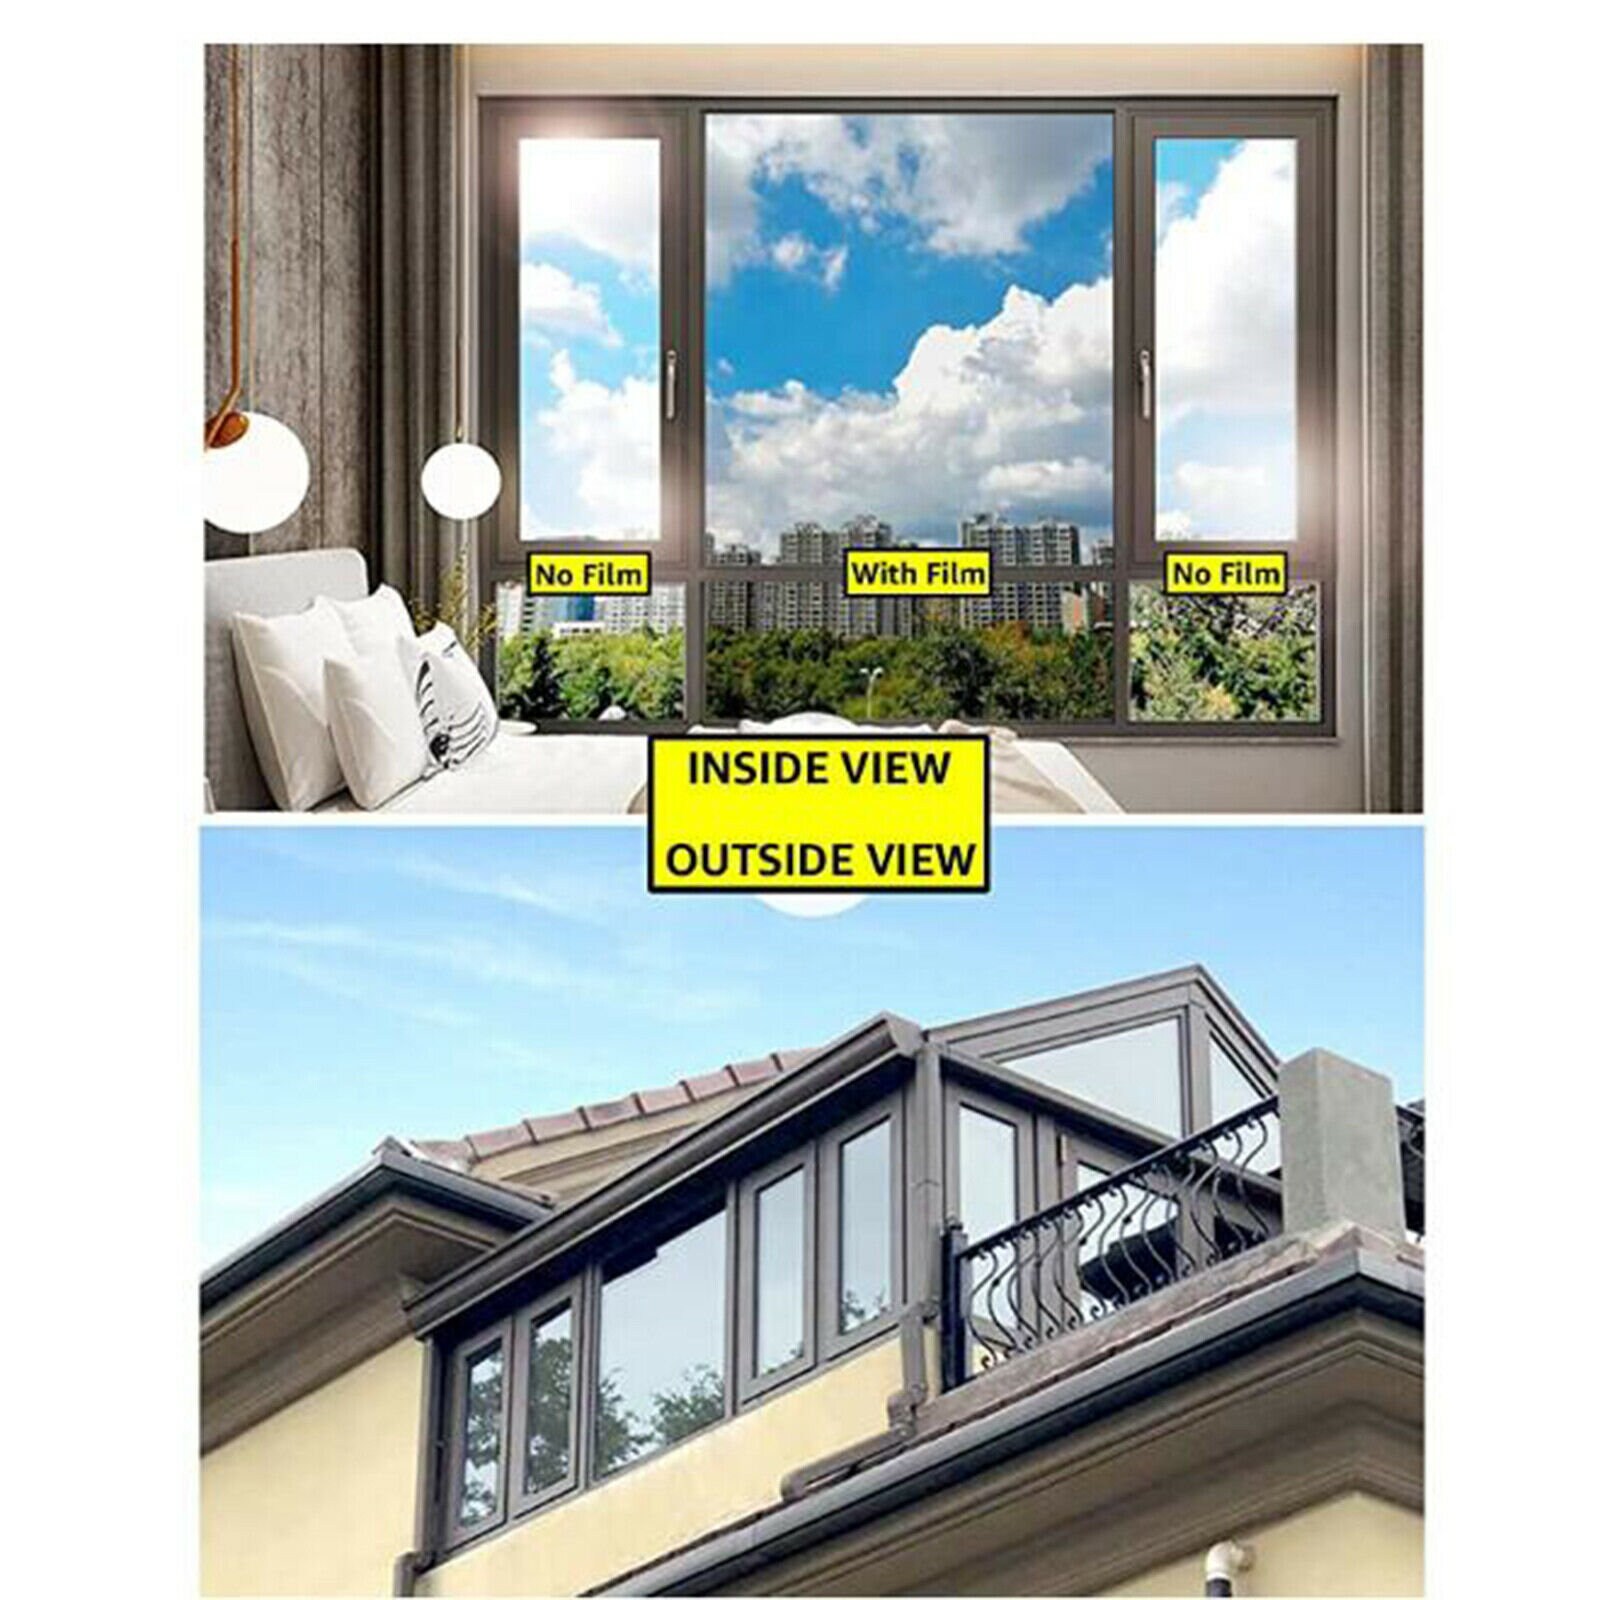 Security laminated Two Way Mirror Film for Home Privacy and Safety 